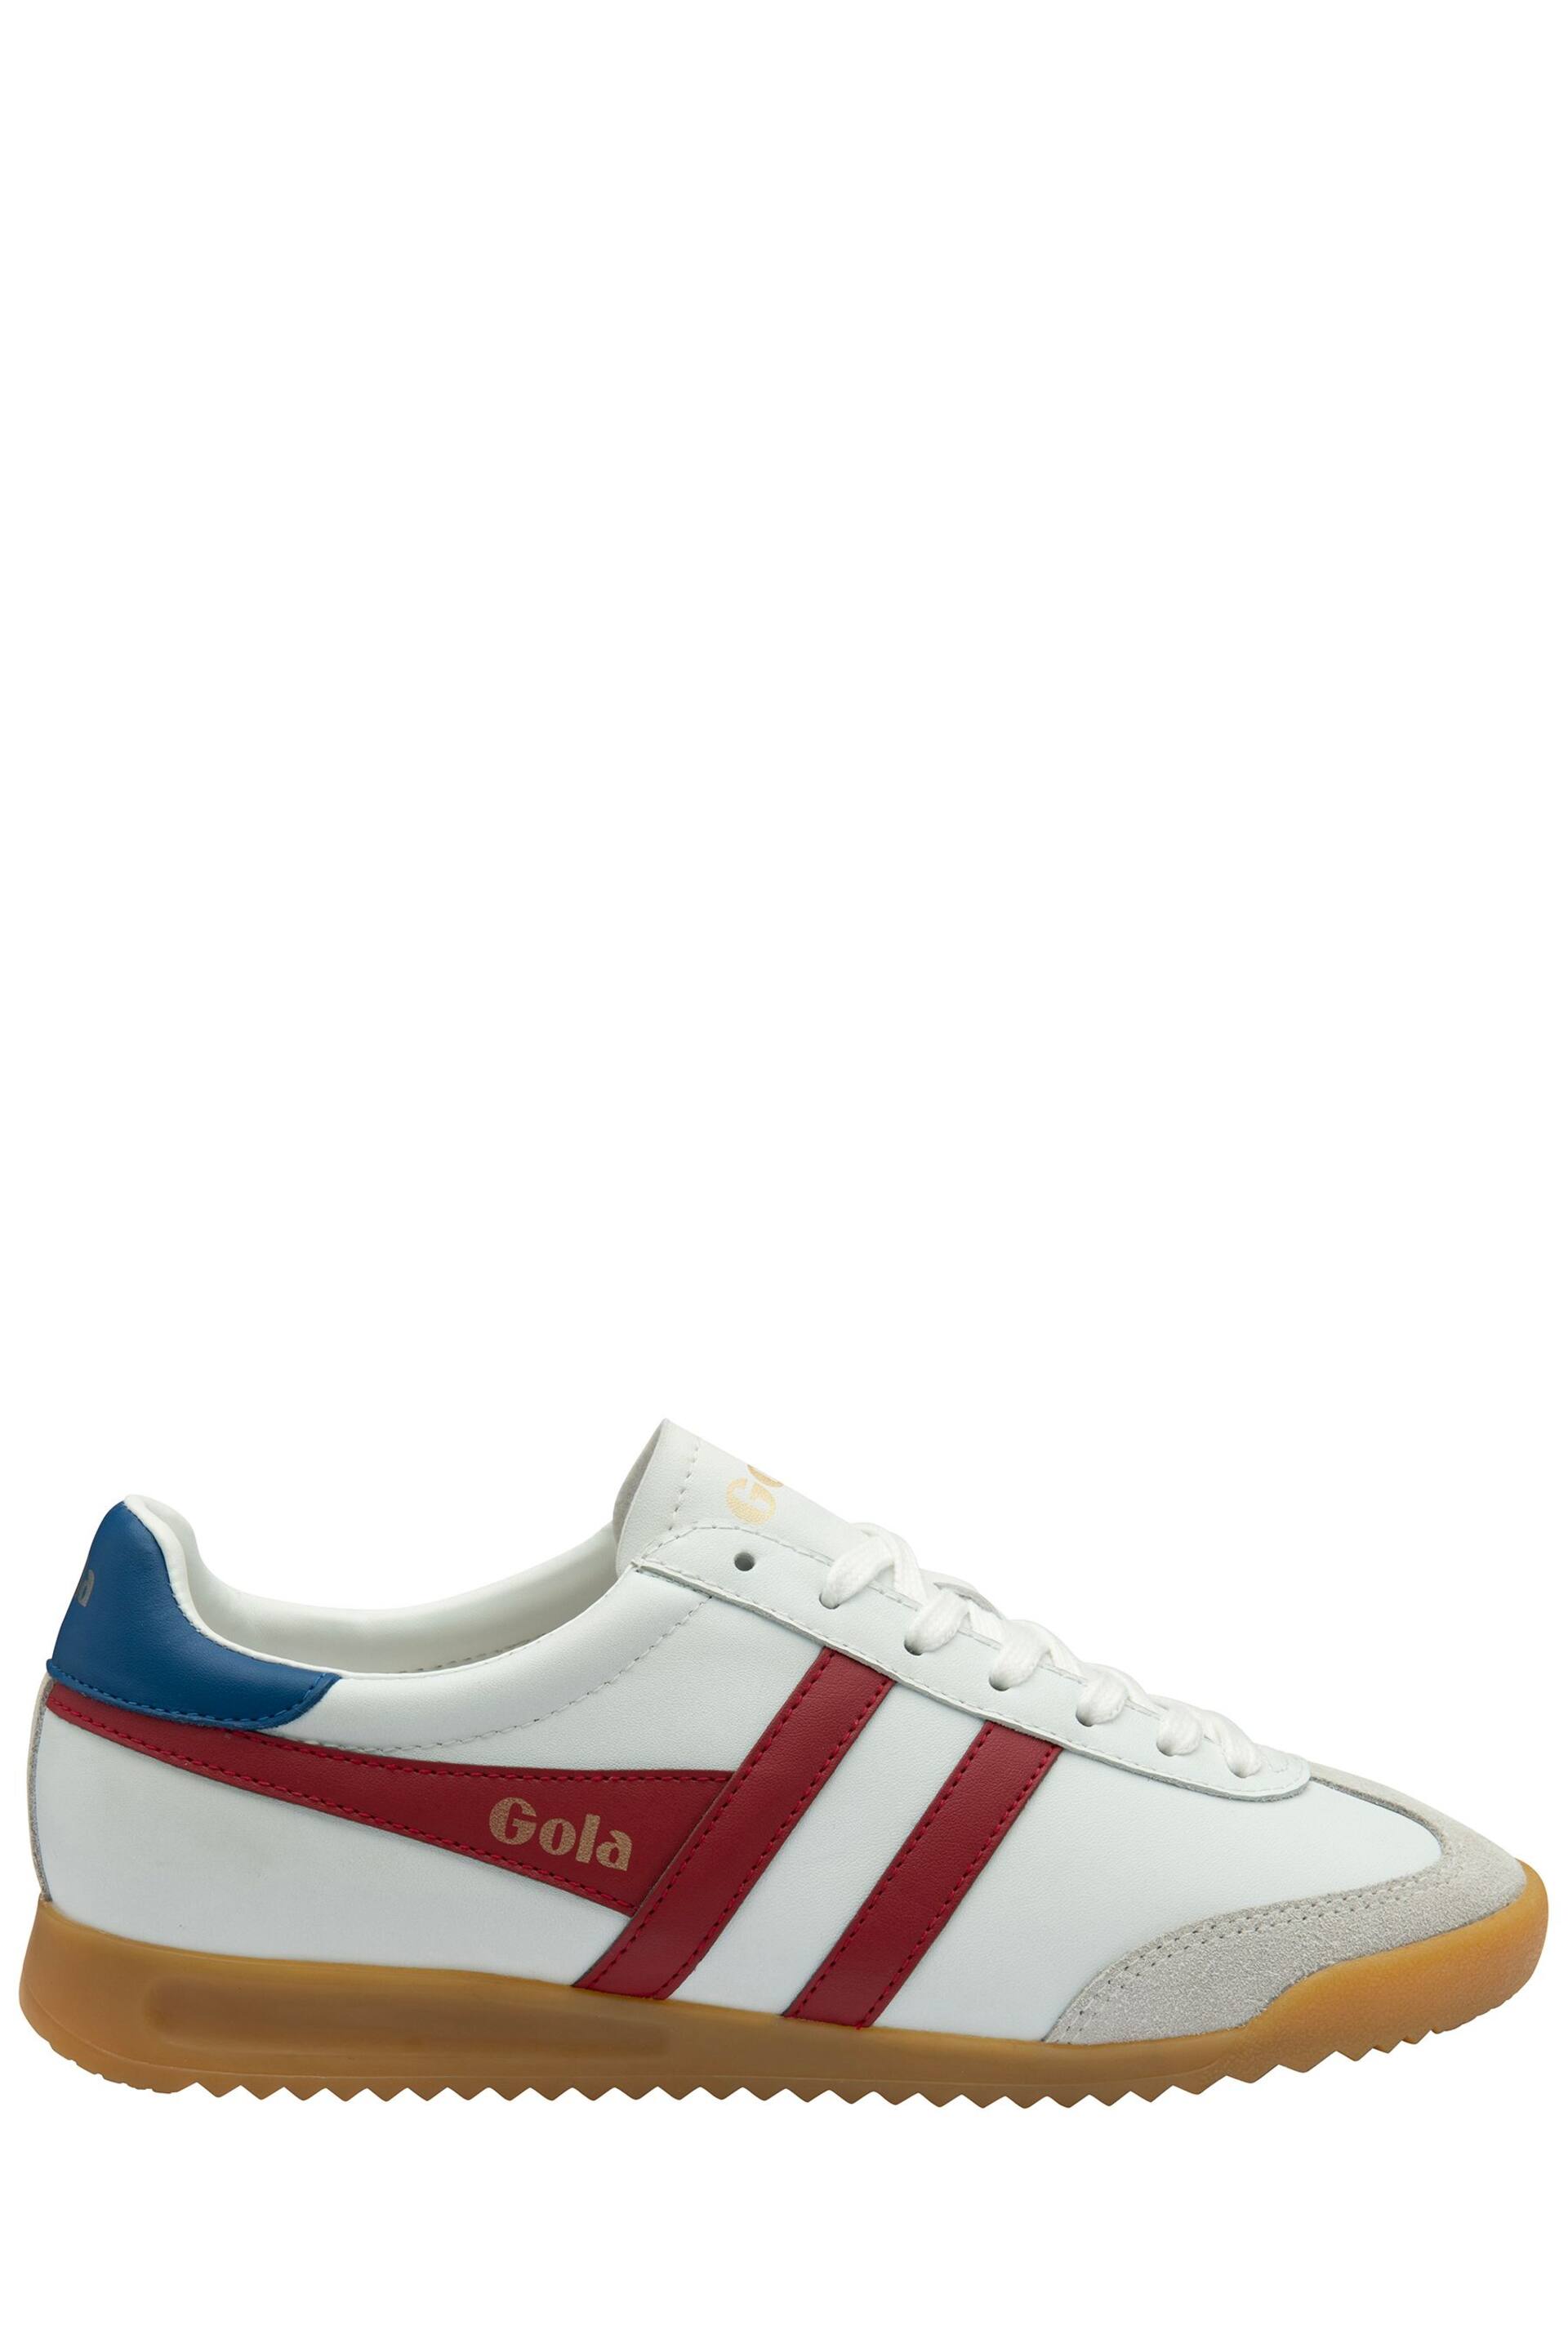 Gola White/Deep Red/Sapphire Mens Torpedo Leather Lace-Up Trainers - Image 1 of 4